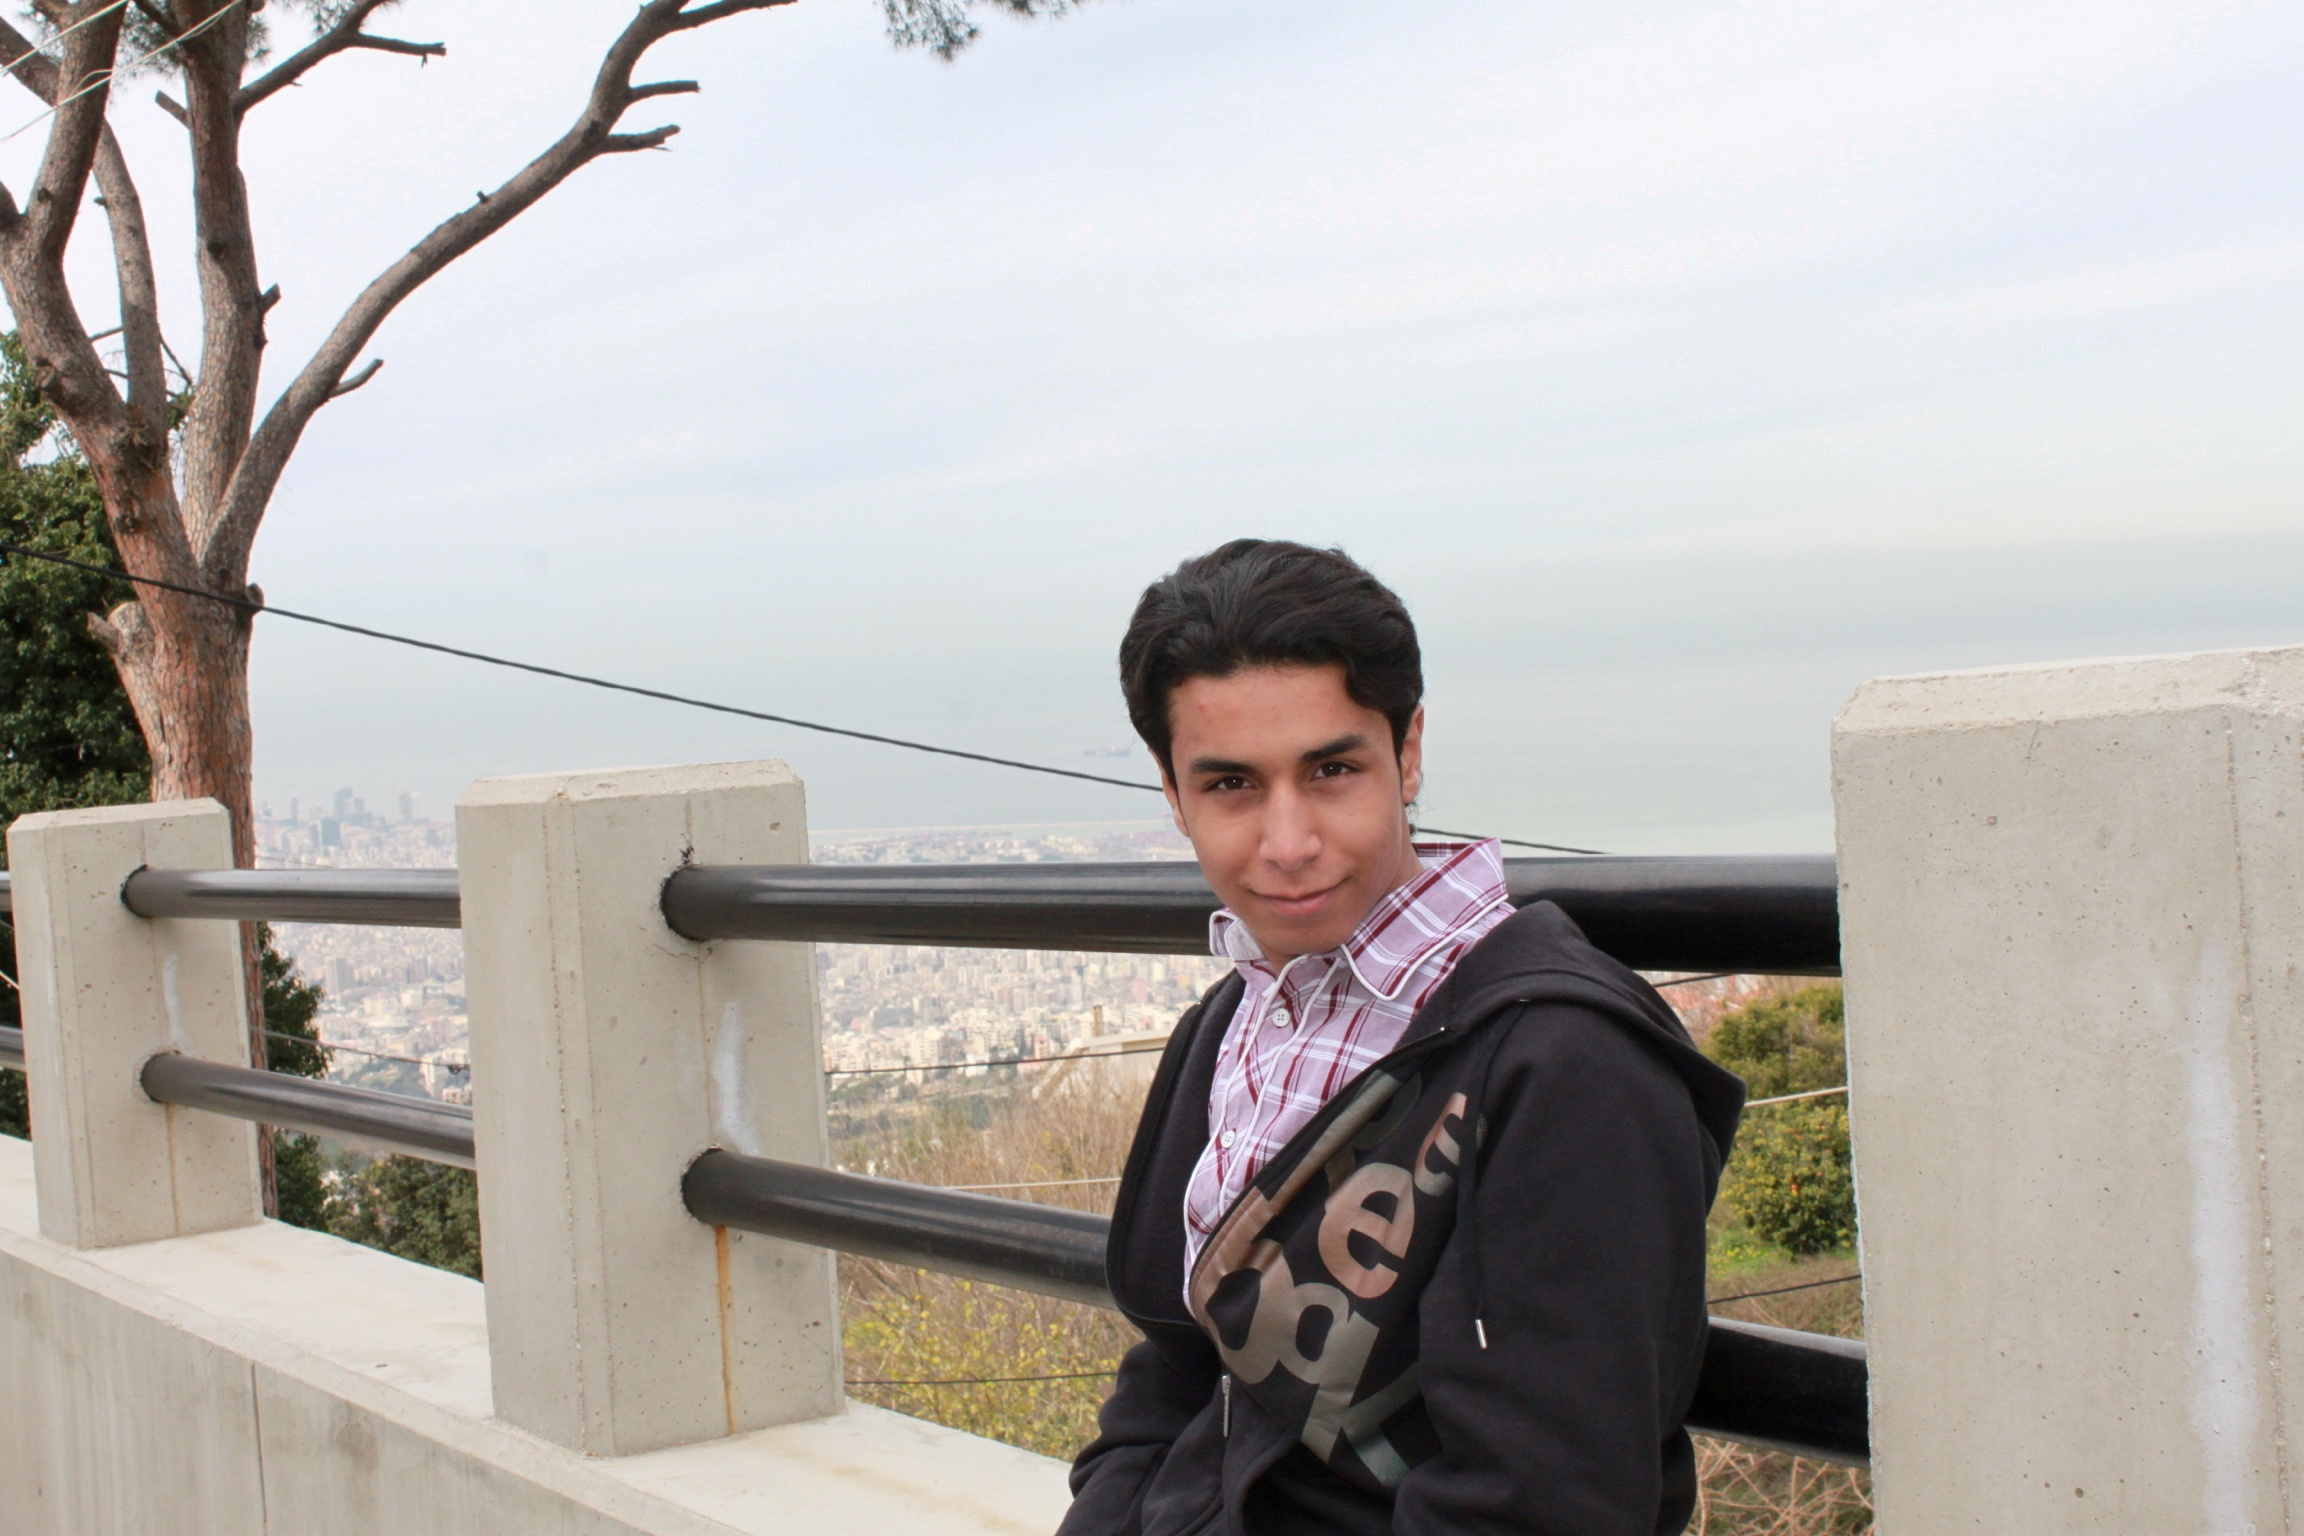 FILE PHOTO: Ali al-Nimr is seen in this undated handout photo